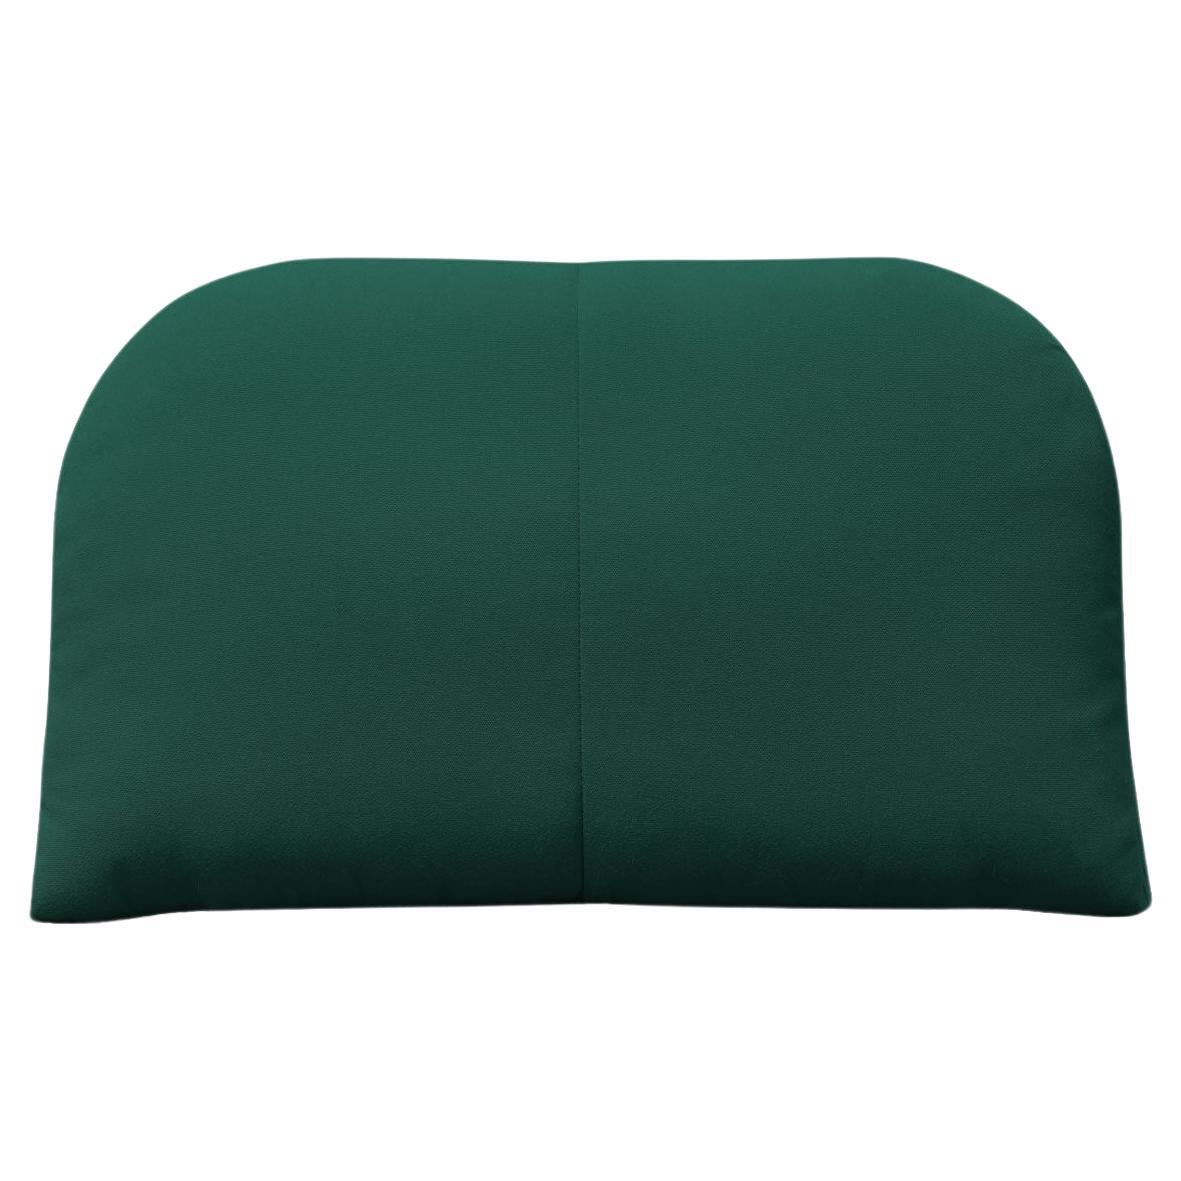 Bend Goods - Arc Throw Pillow in Forest Green Sunbrella For Sale